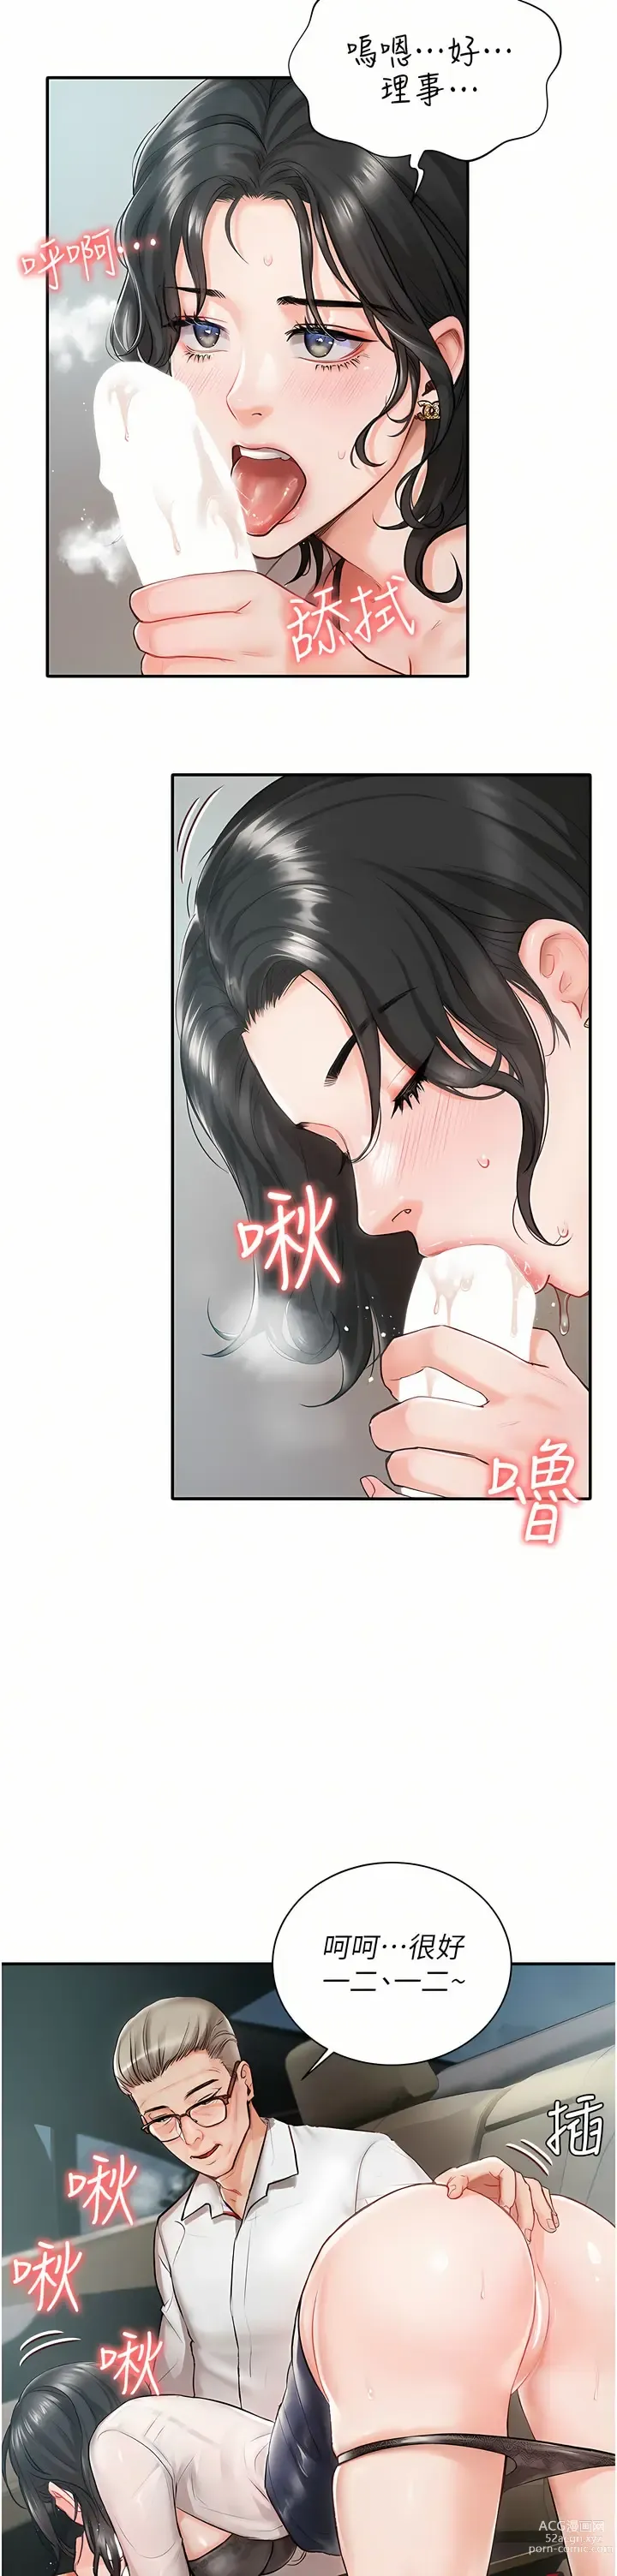 Page 5 of manga 私宅女主人／Hyeonjung’s Residence